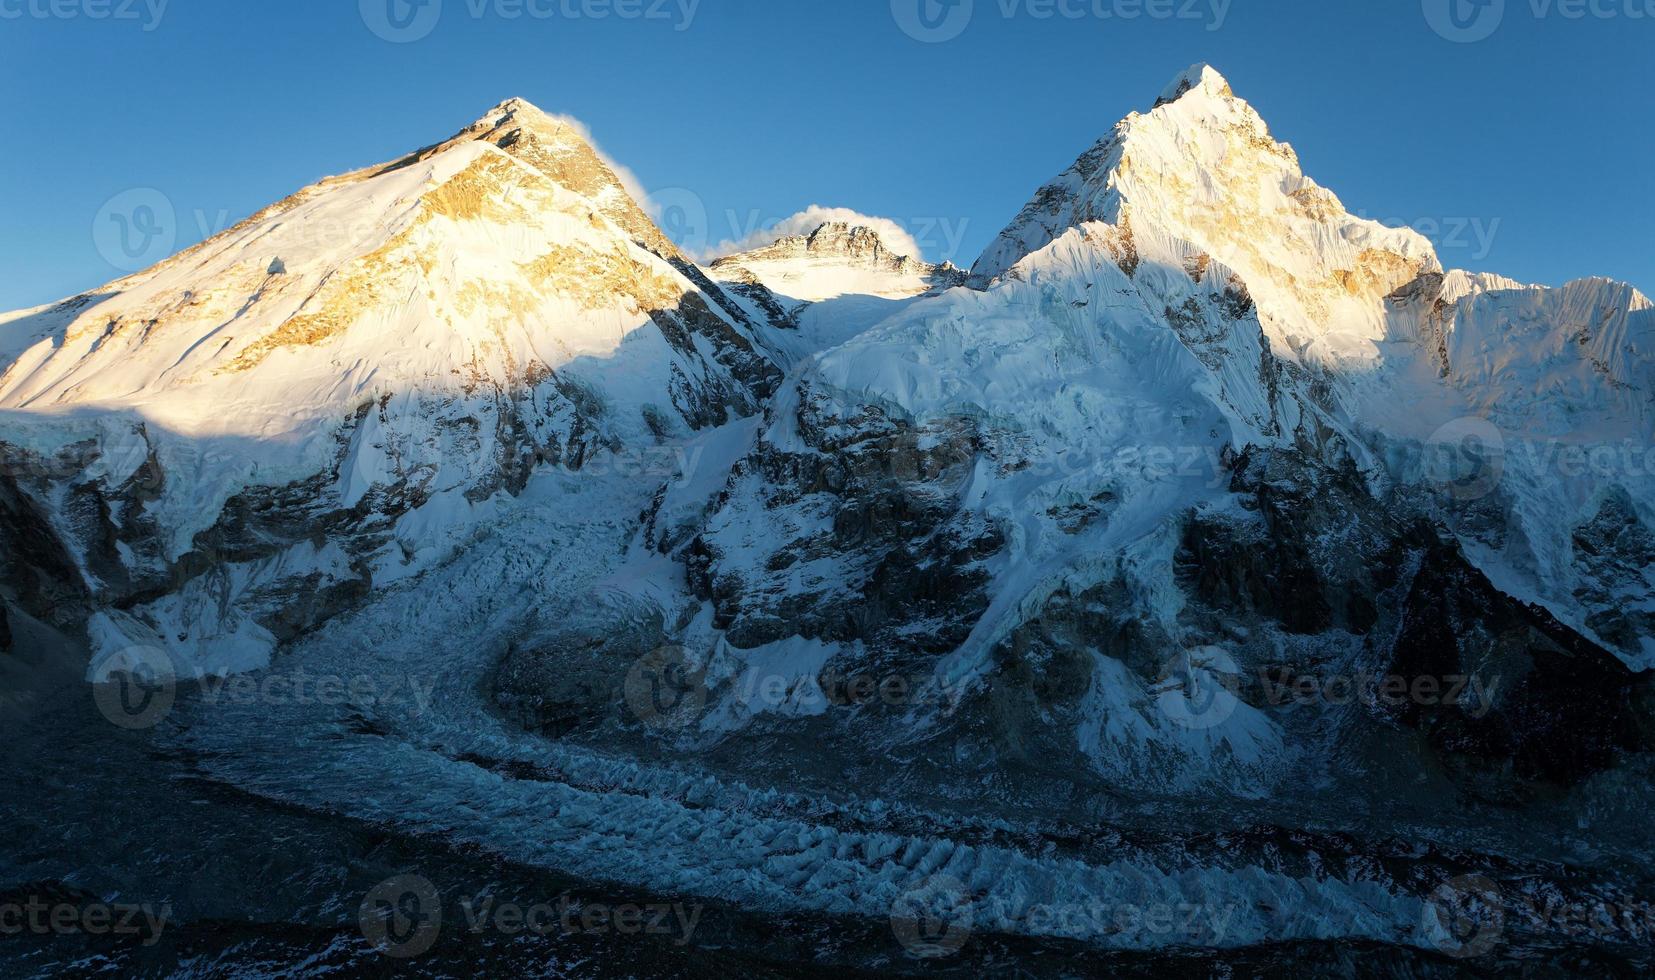 Evening view of Everest from Pumo Ri base camp photo